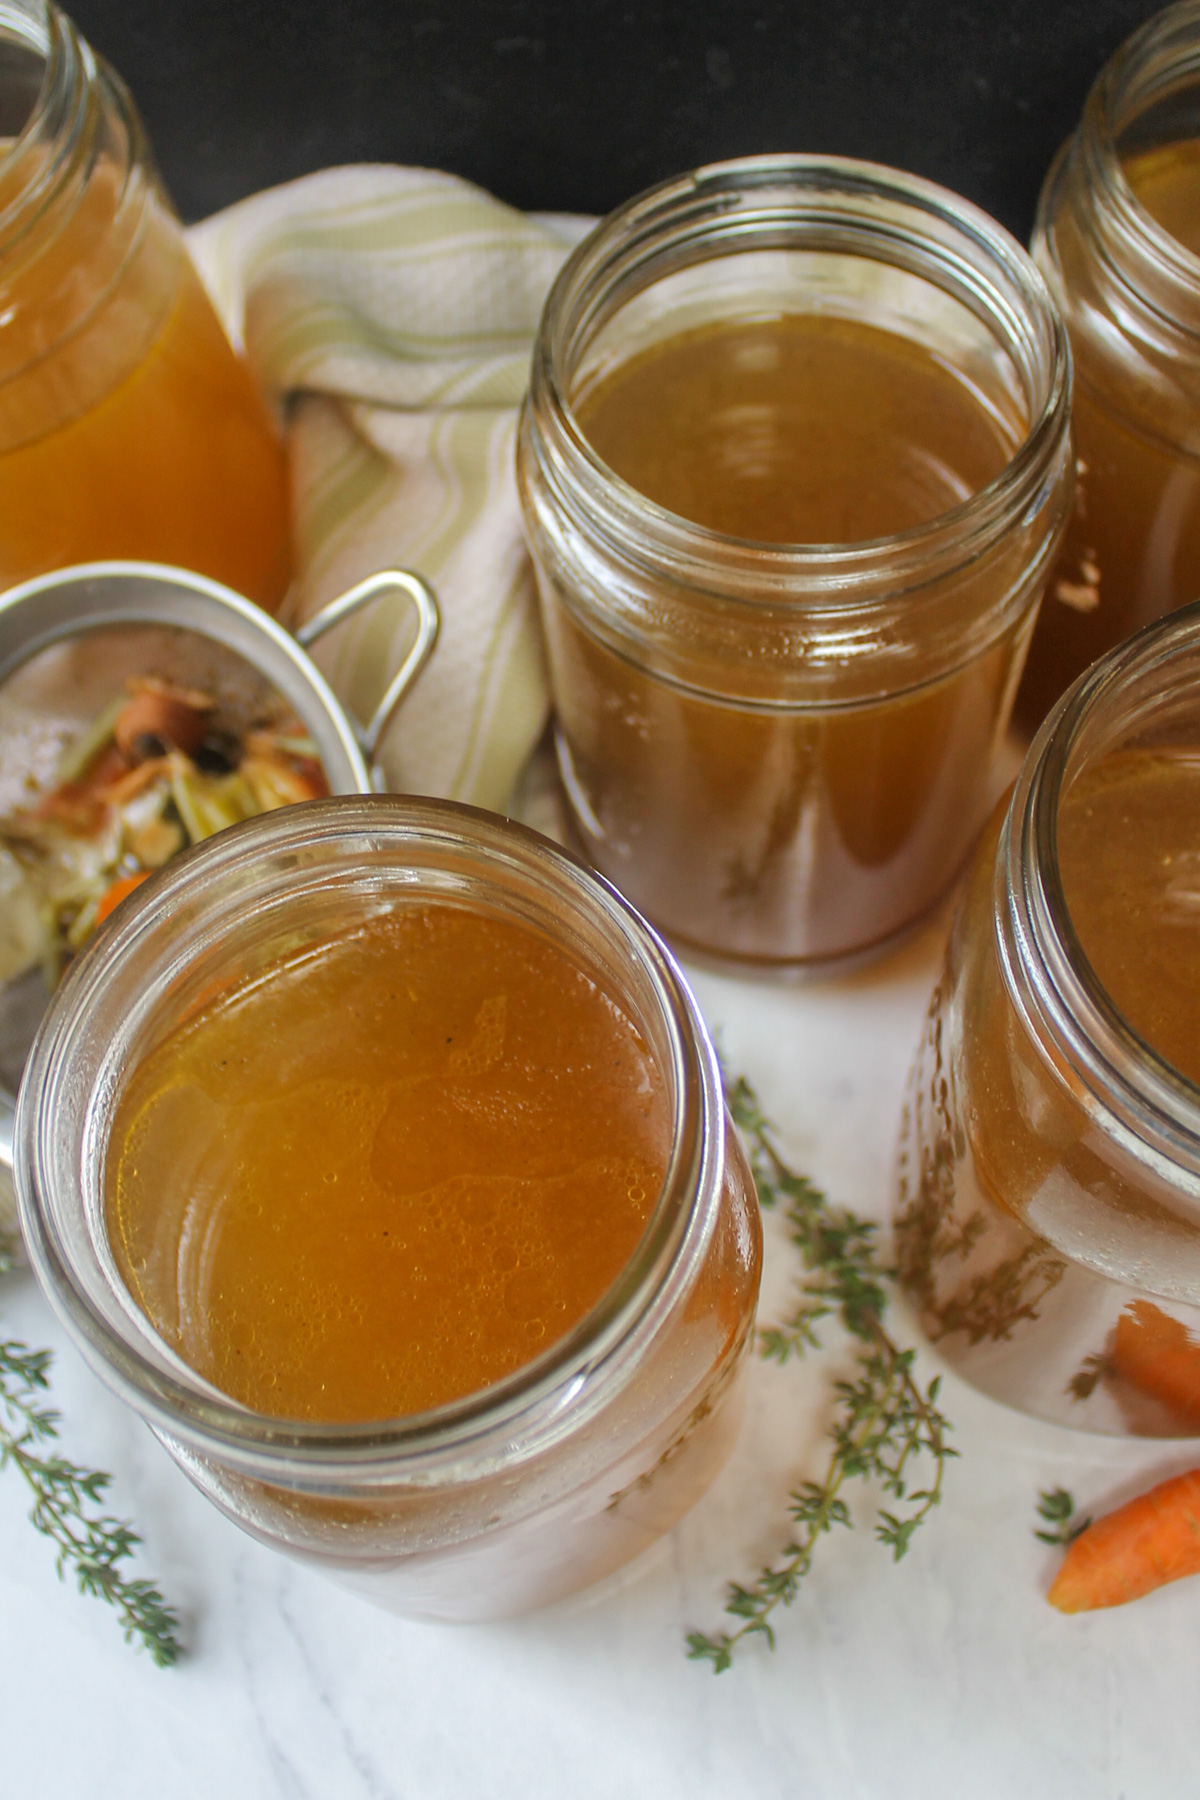 Top down view of jars of golden brown chicken stock made from kitchen scraps.